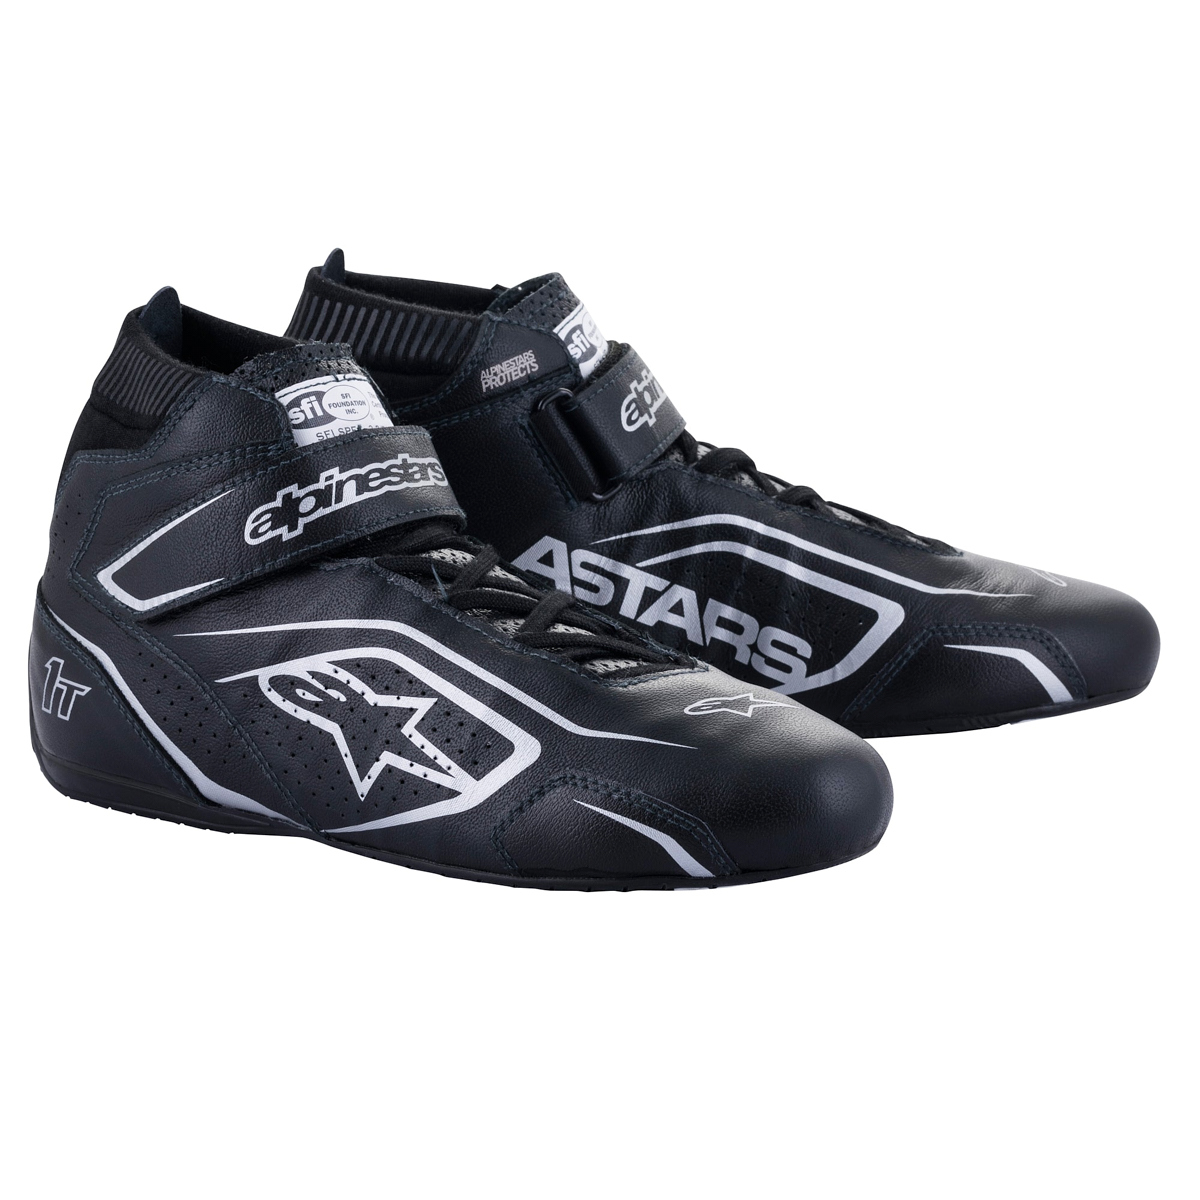 Alpinestars 2710122-119-8 Driving Shoe, Tech 1-T V3, Mid-Top, SFI 3.3, Leather Outer, Nomex Inner, Black / Silver, Size 8, Pair